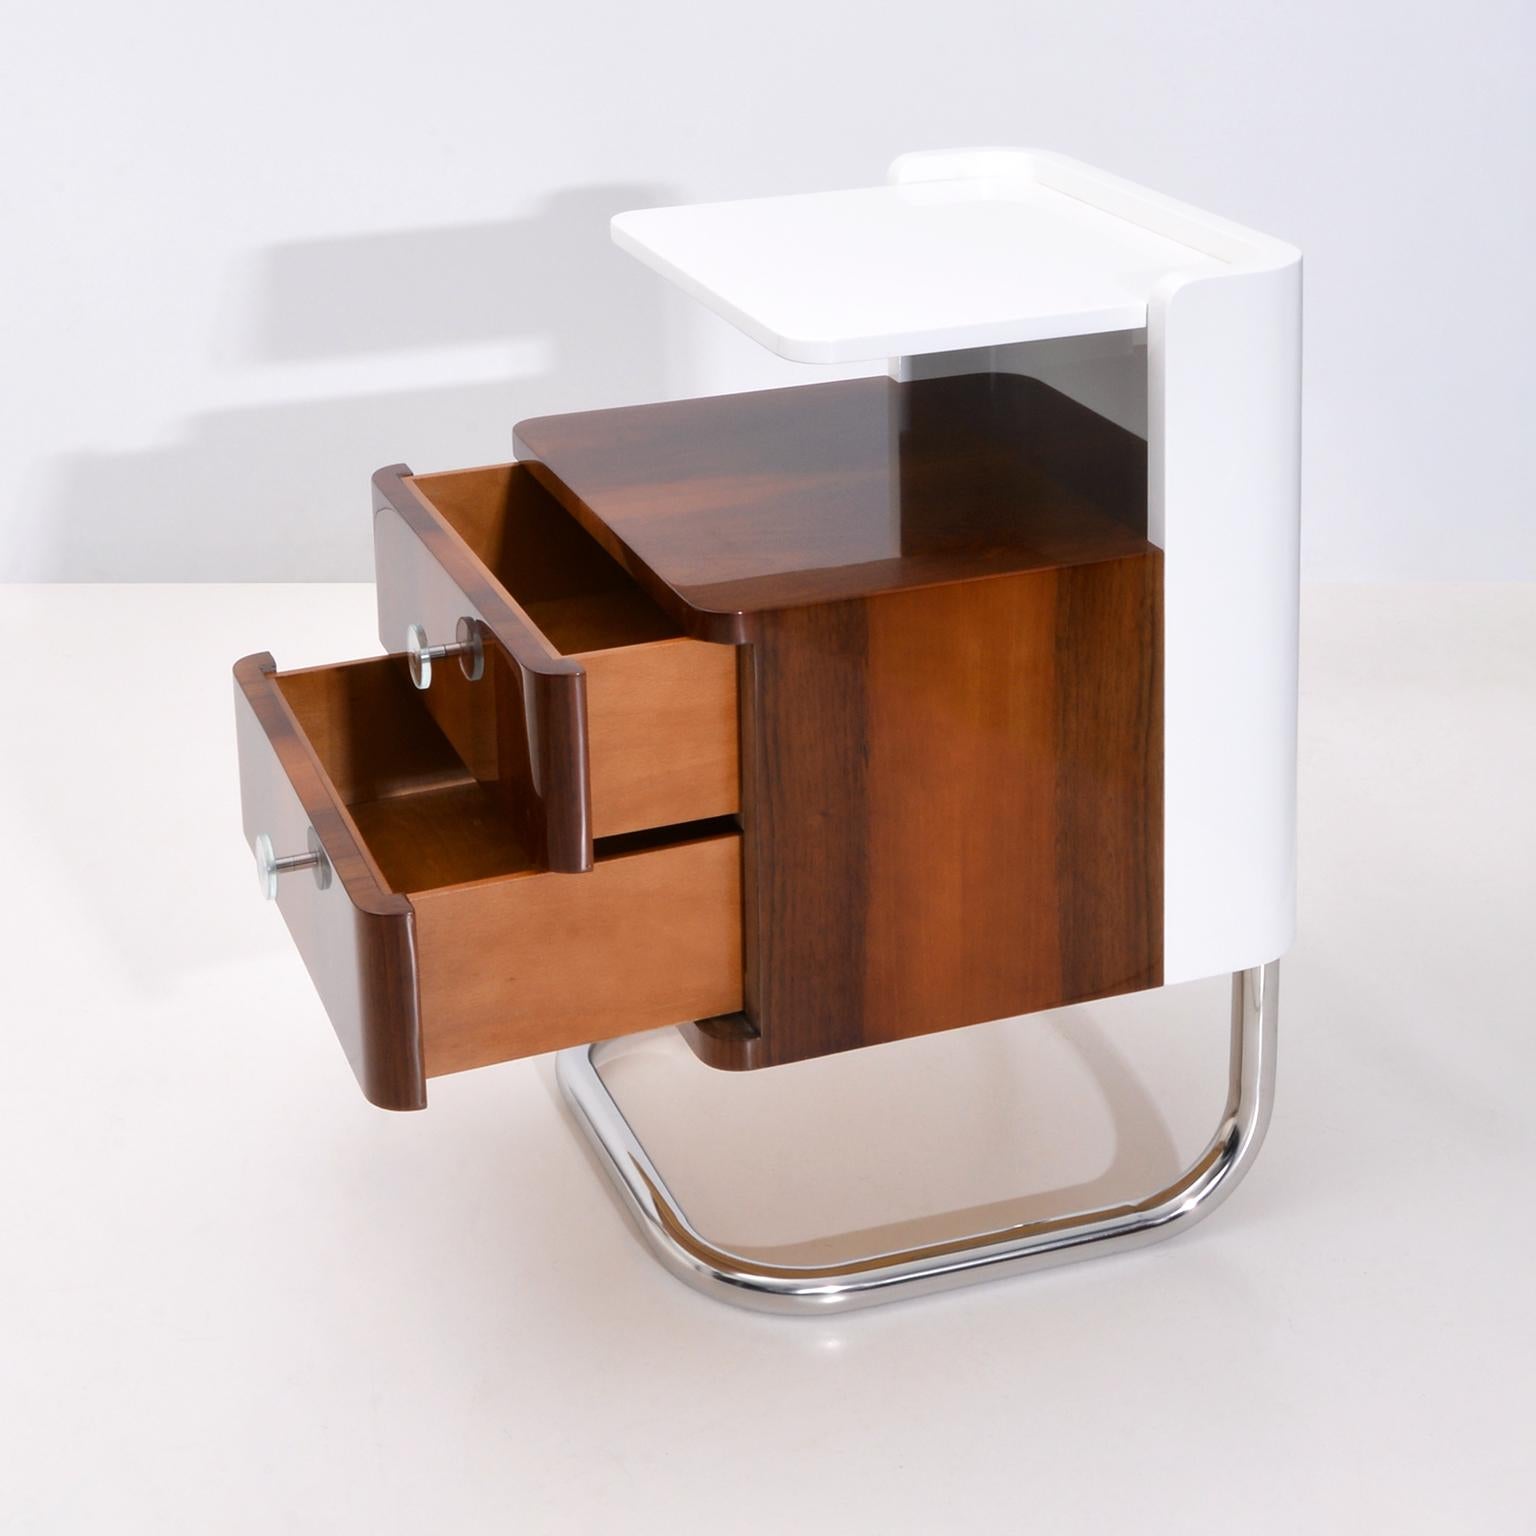 Modern contemporary customizable bedside tables, handcrafted wood, manufactured by GMD Berlin, Germany, design 2019.

Delivery time: 6-7 weeks.